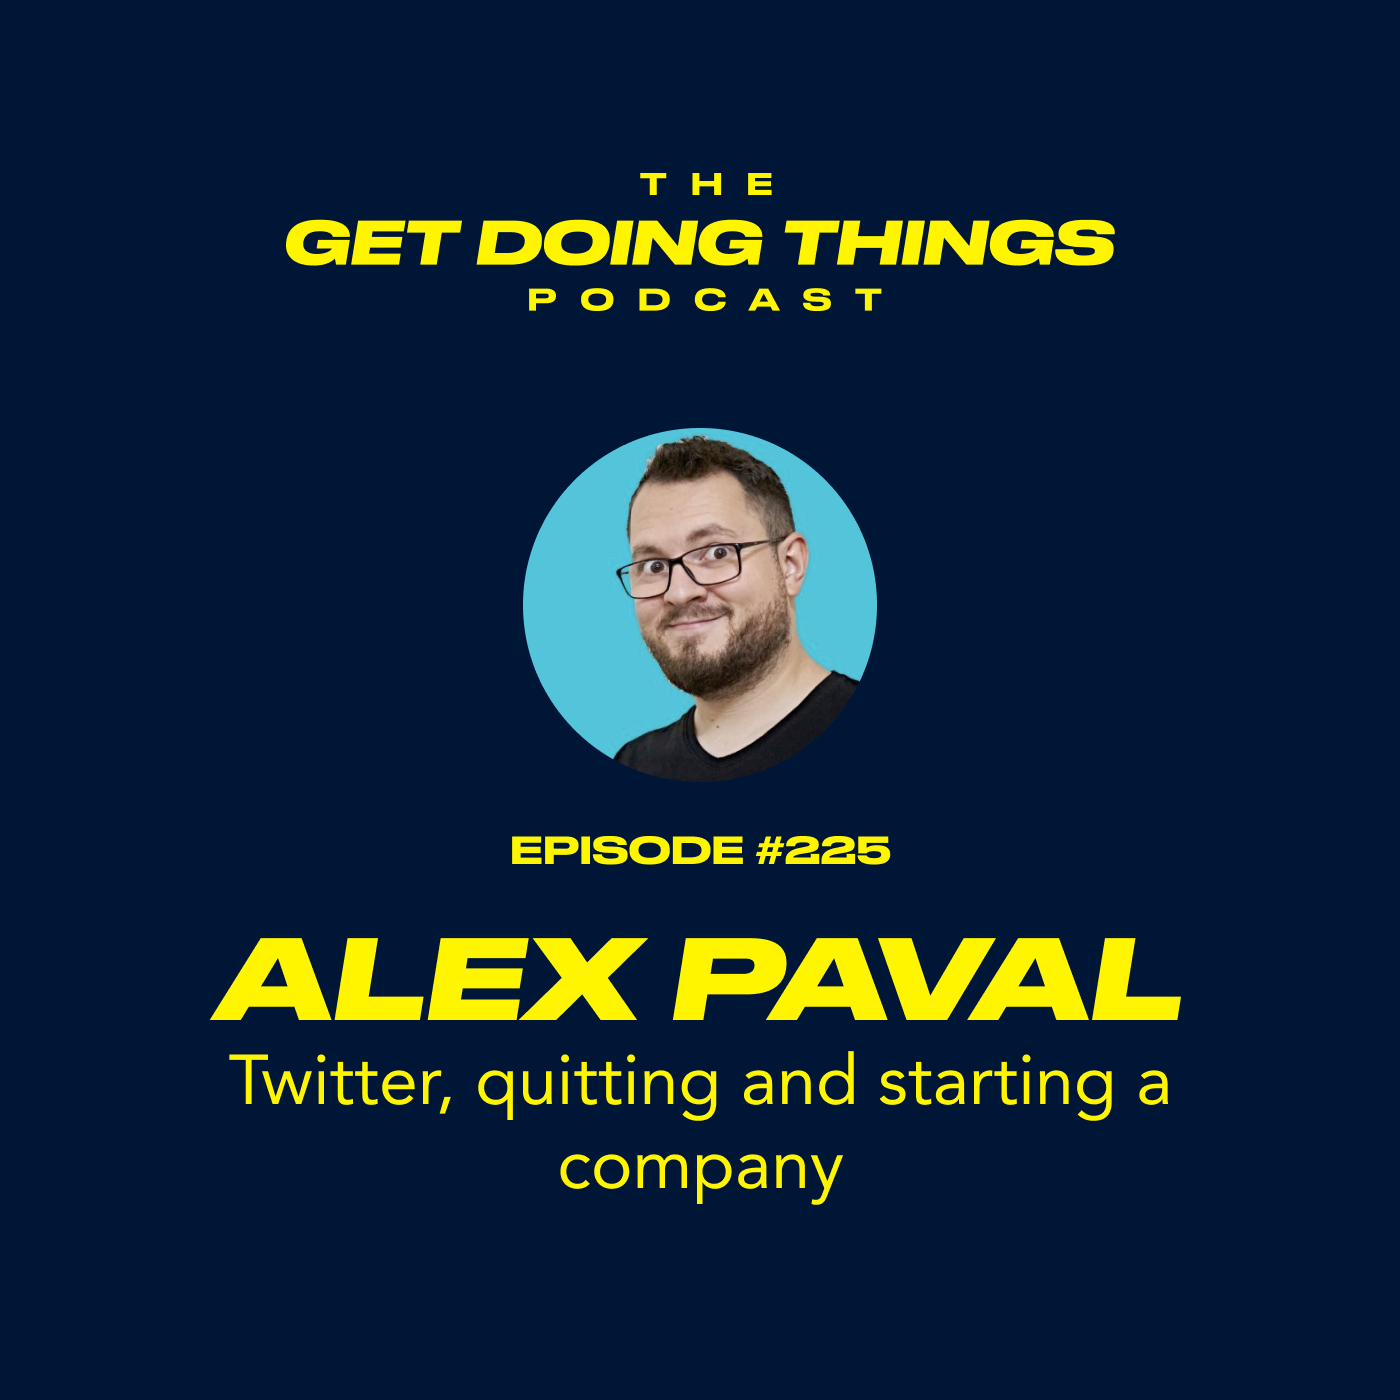 Alex Paval - Twitter, quitting a job and starting a company